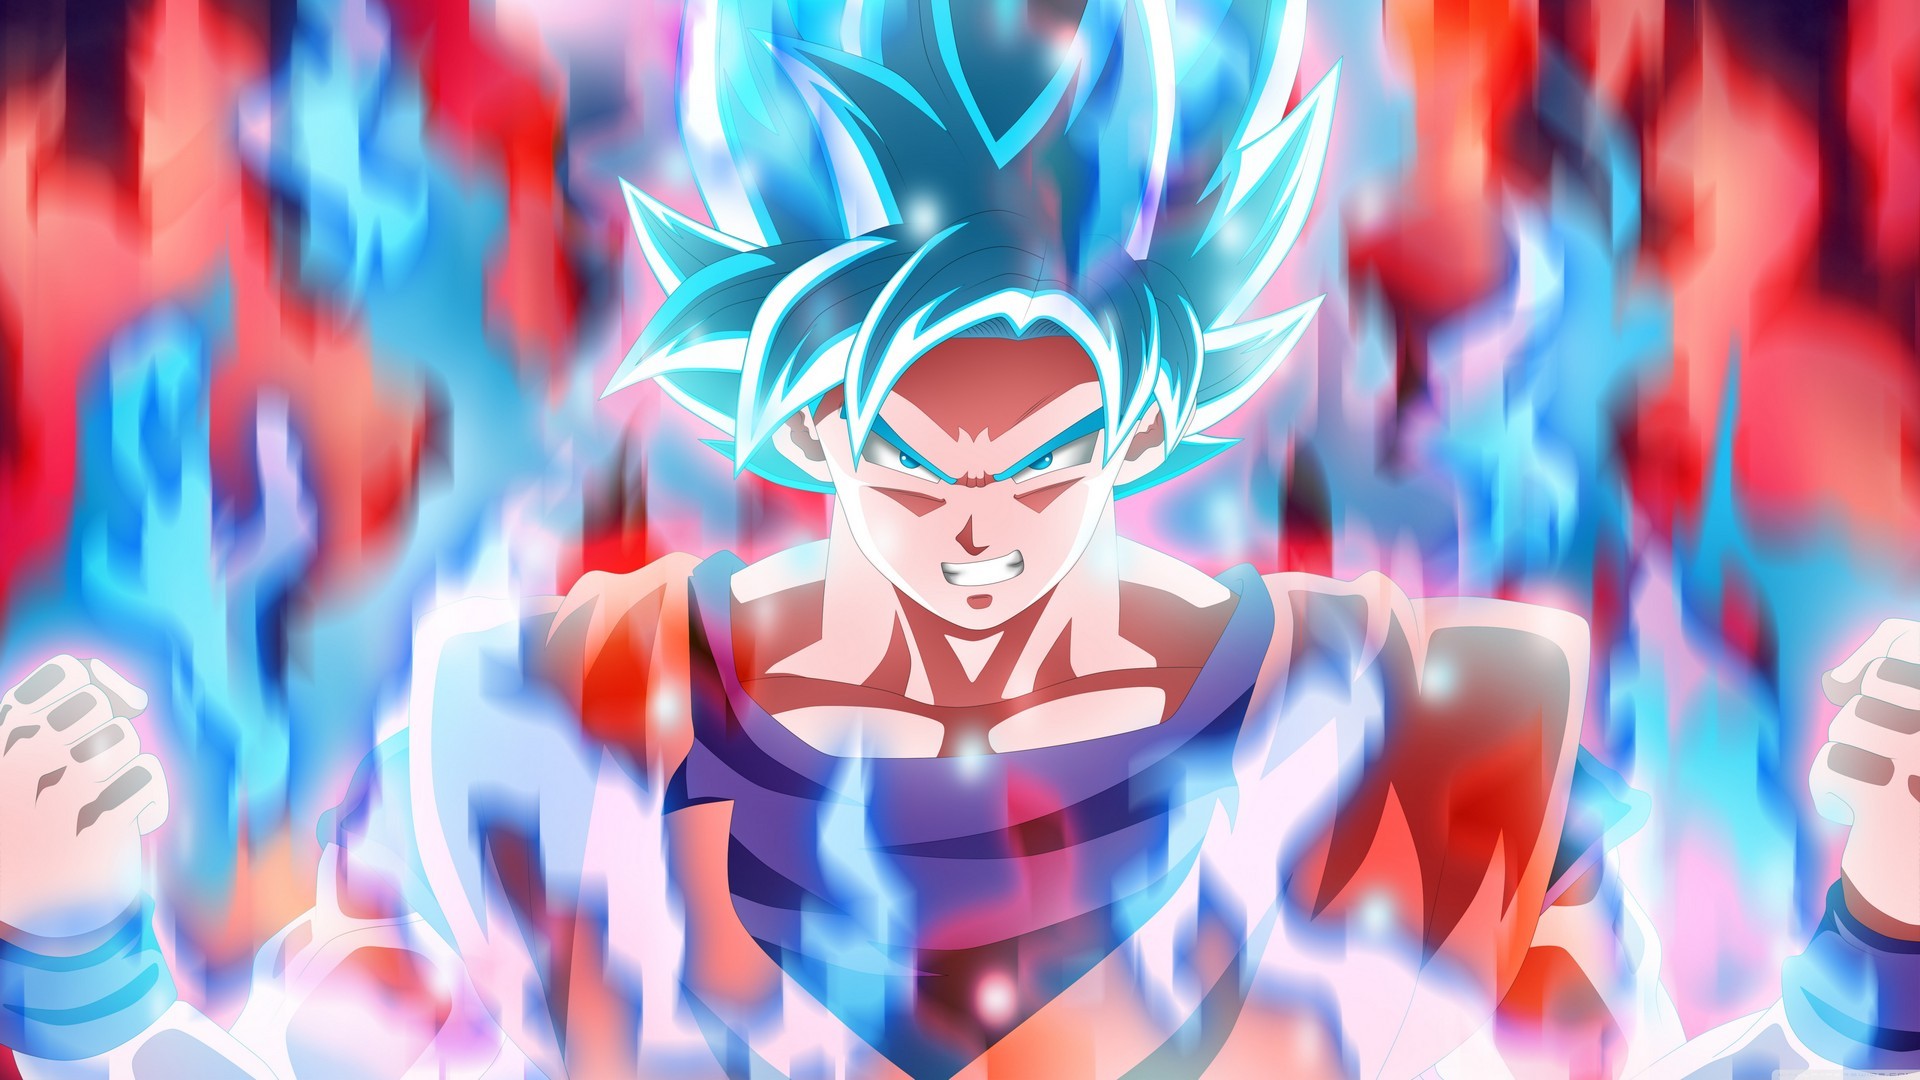 Wallpapers Goku SSJ Blue with image resolution 1920x1080 pixel. You can use this wallpaper as background for your desktop Computer Screensavers, Android or iPhone smartphones